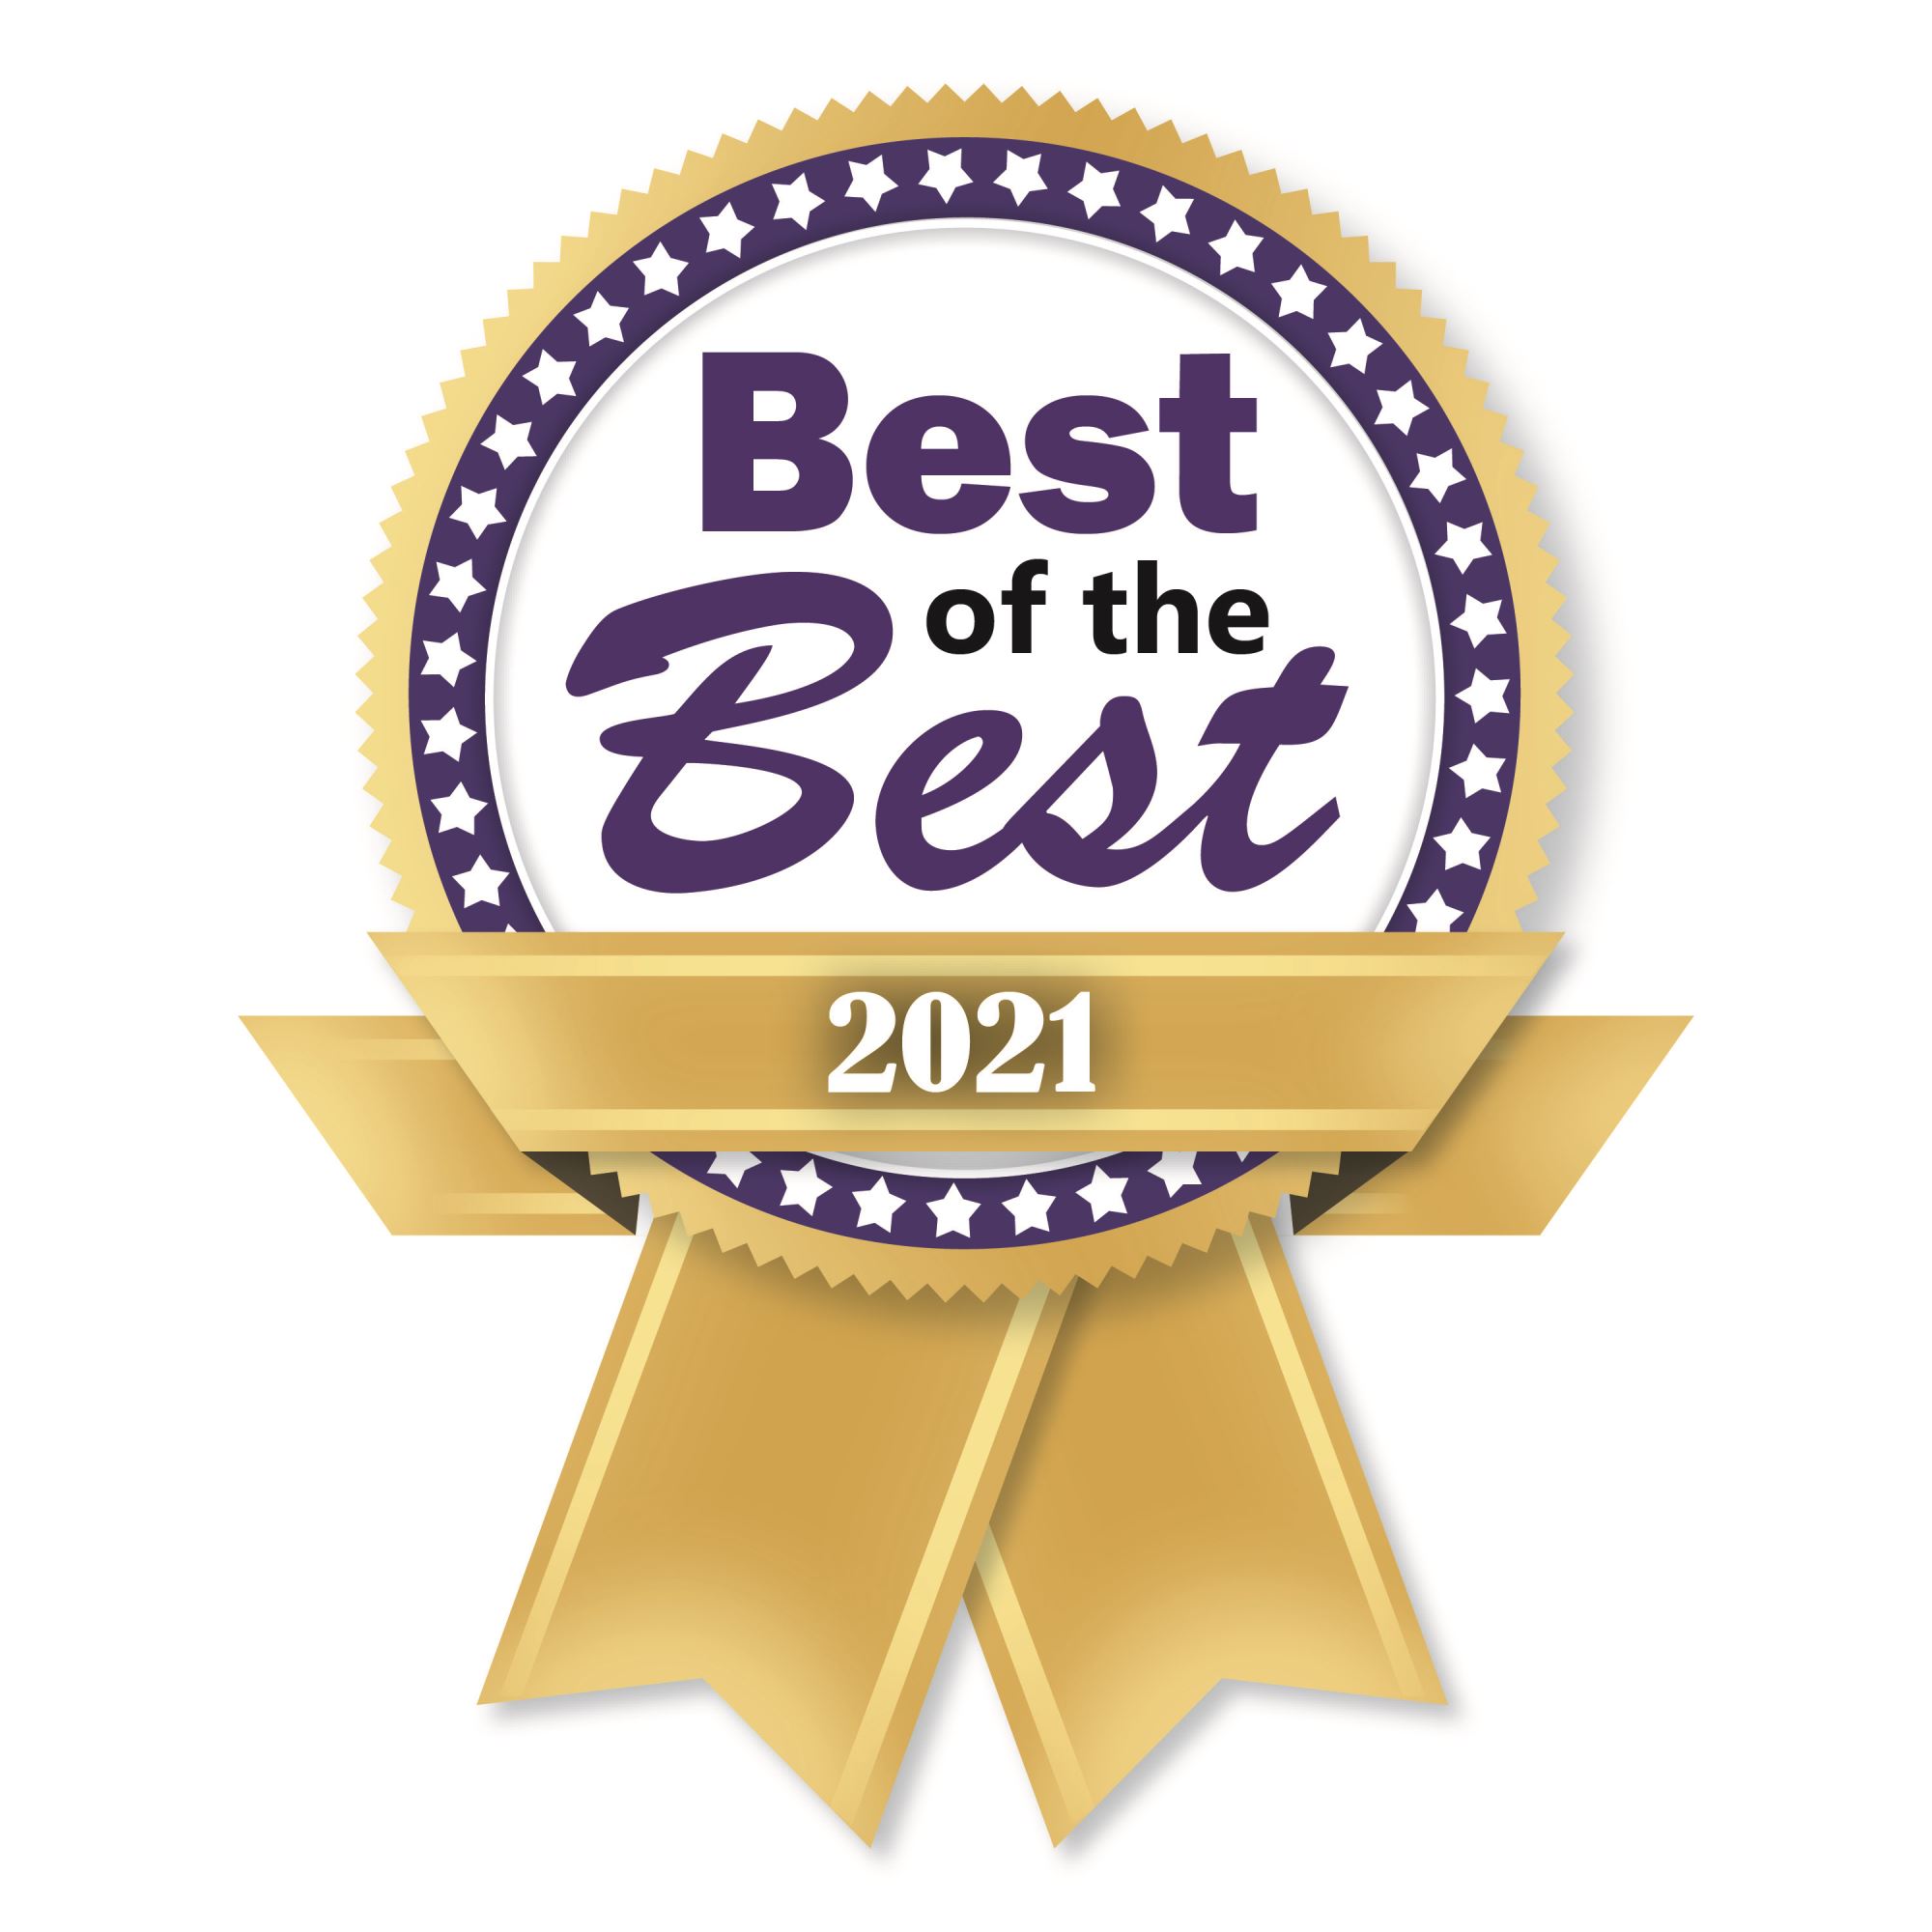 Best of the Best 2021 Ribbon